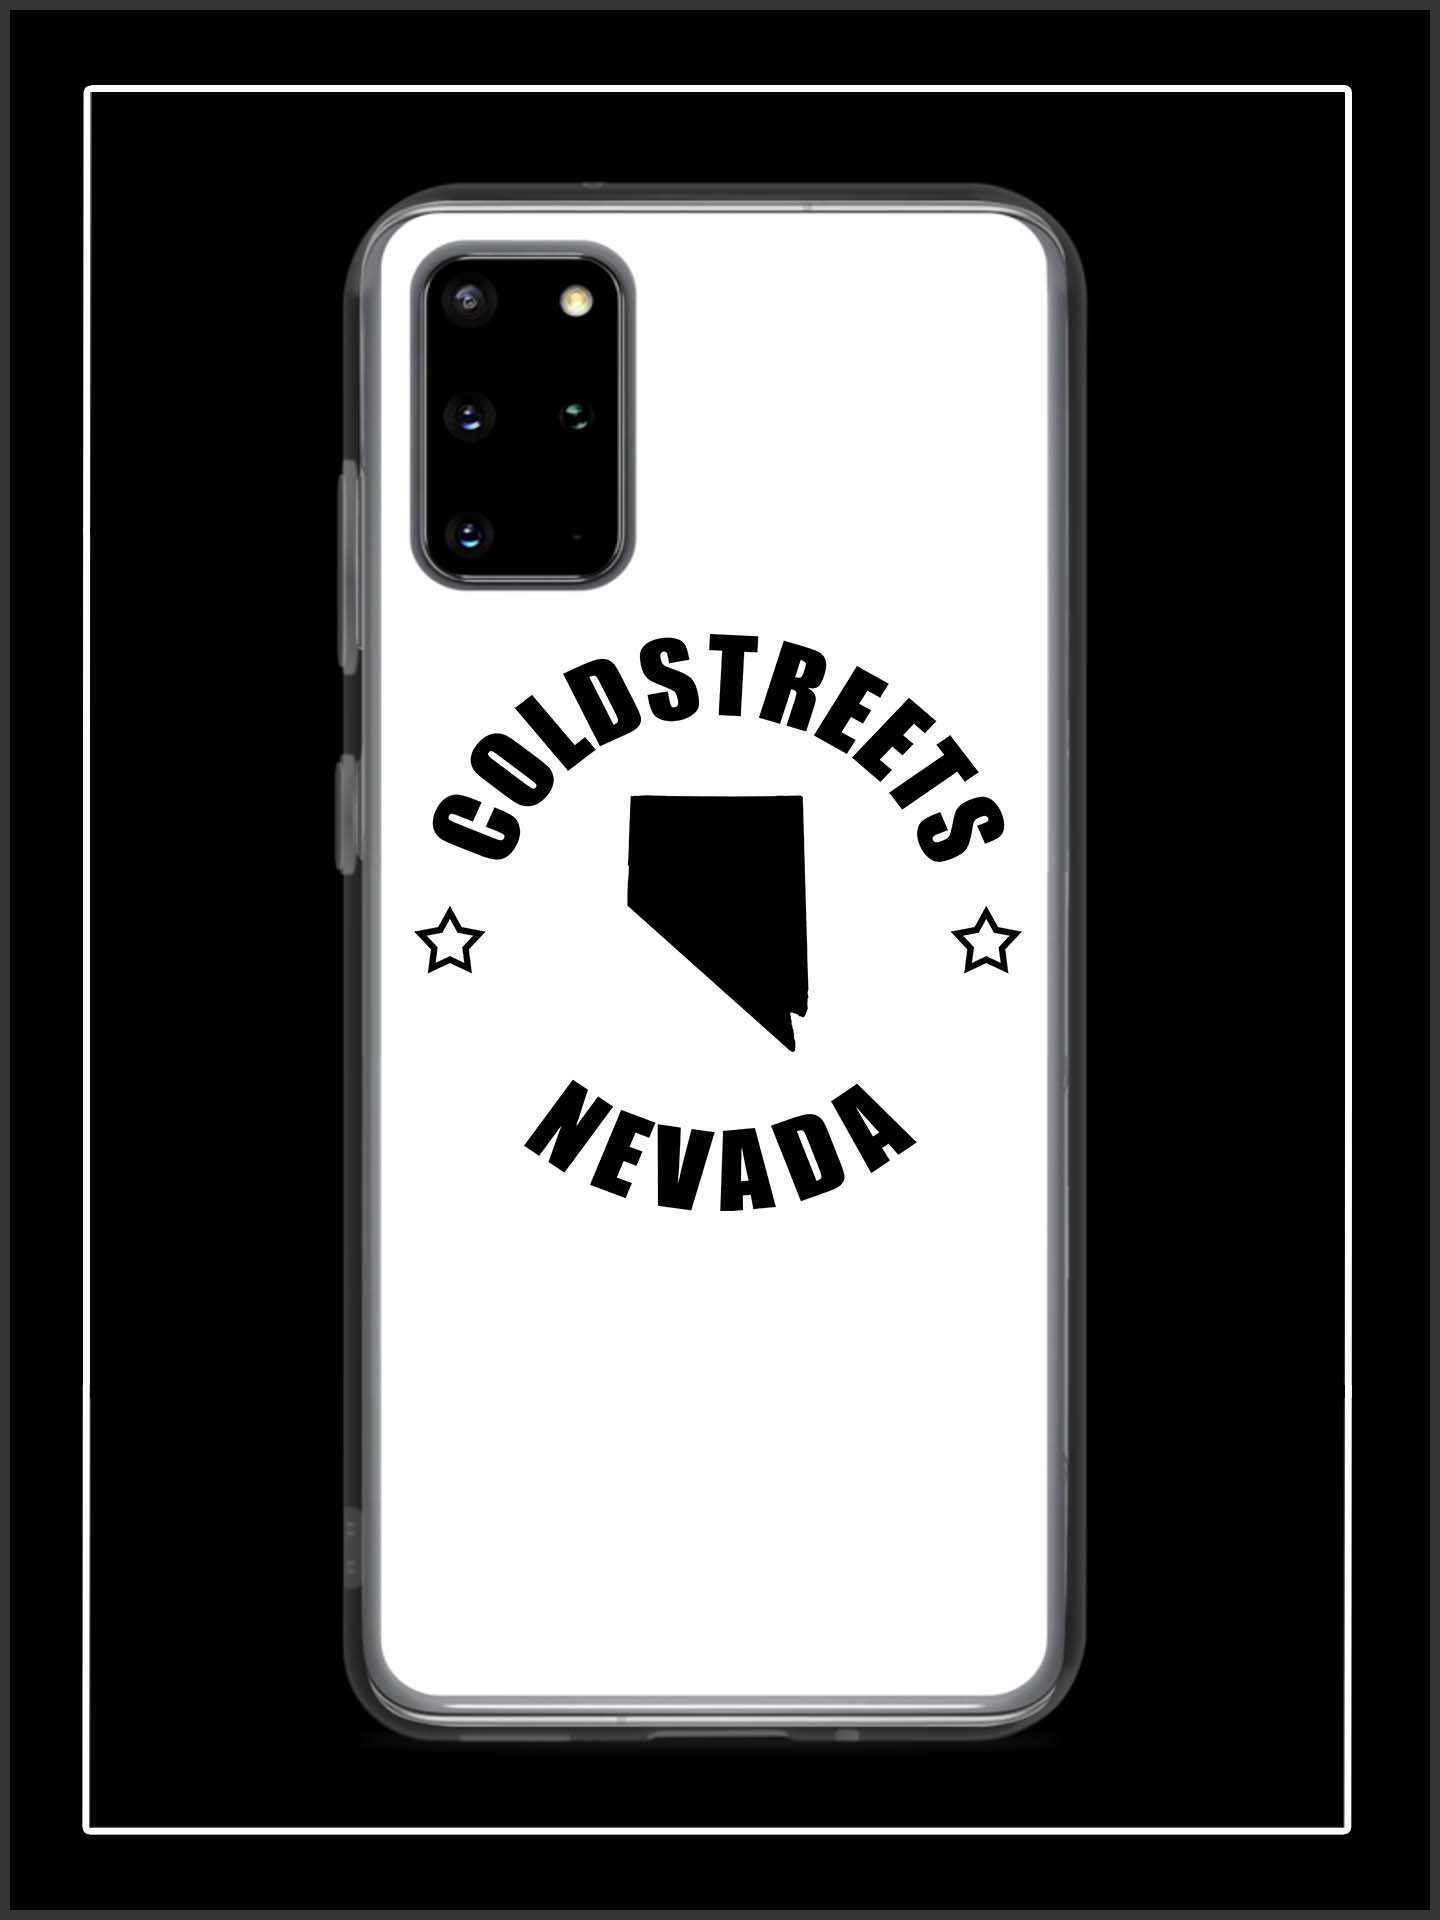 Cold Streets Nevada Samsung Cases